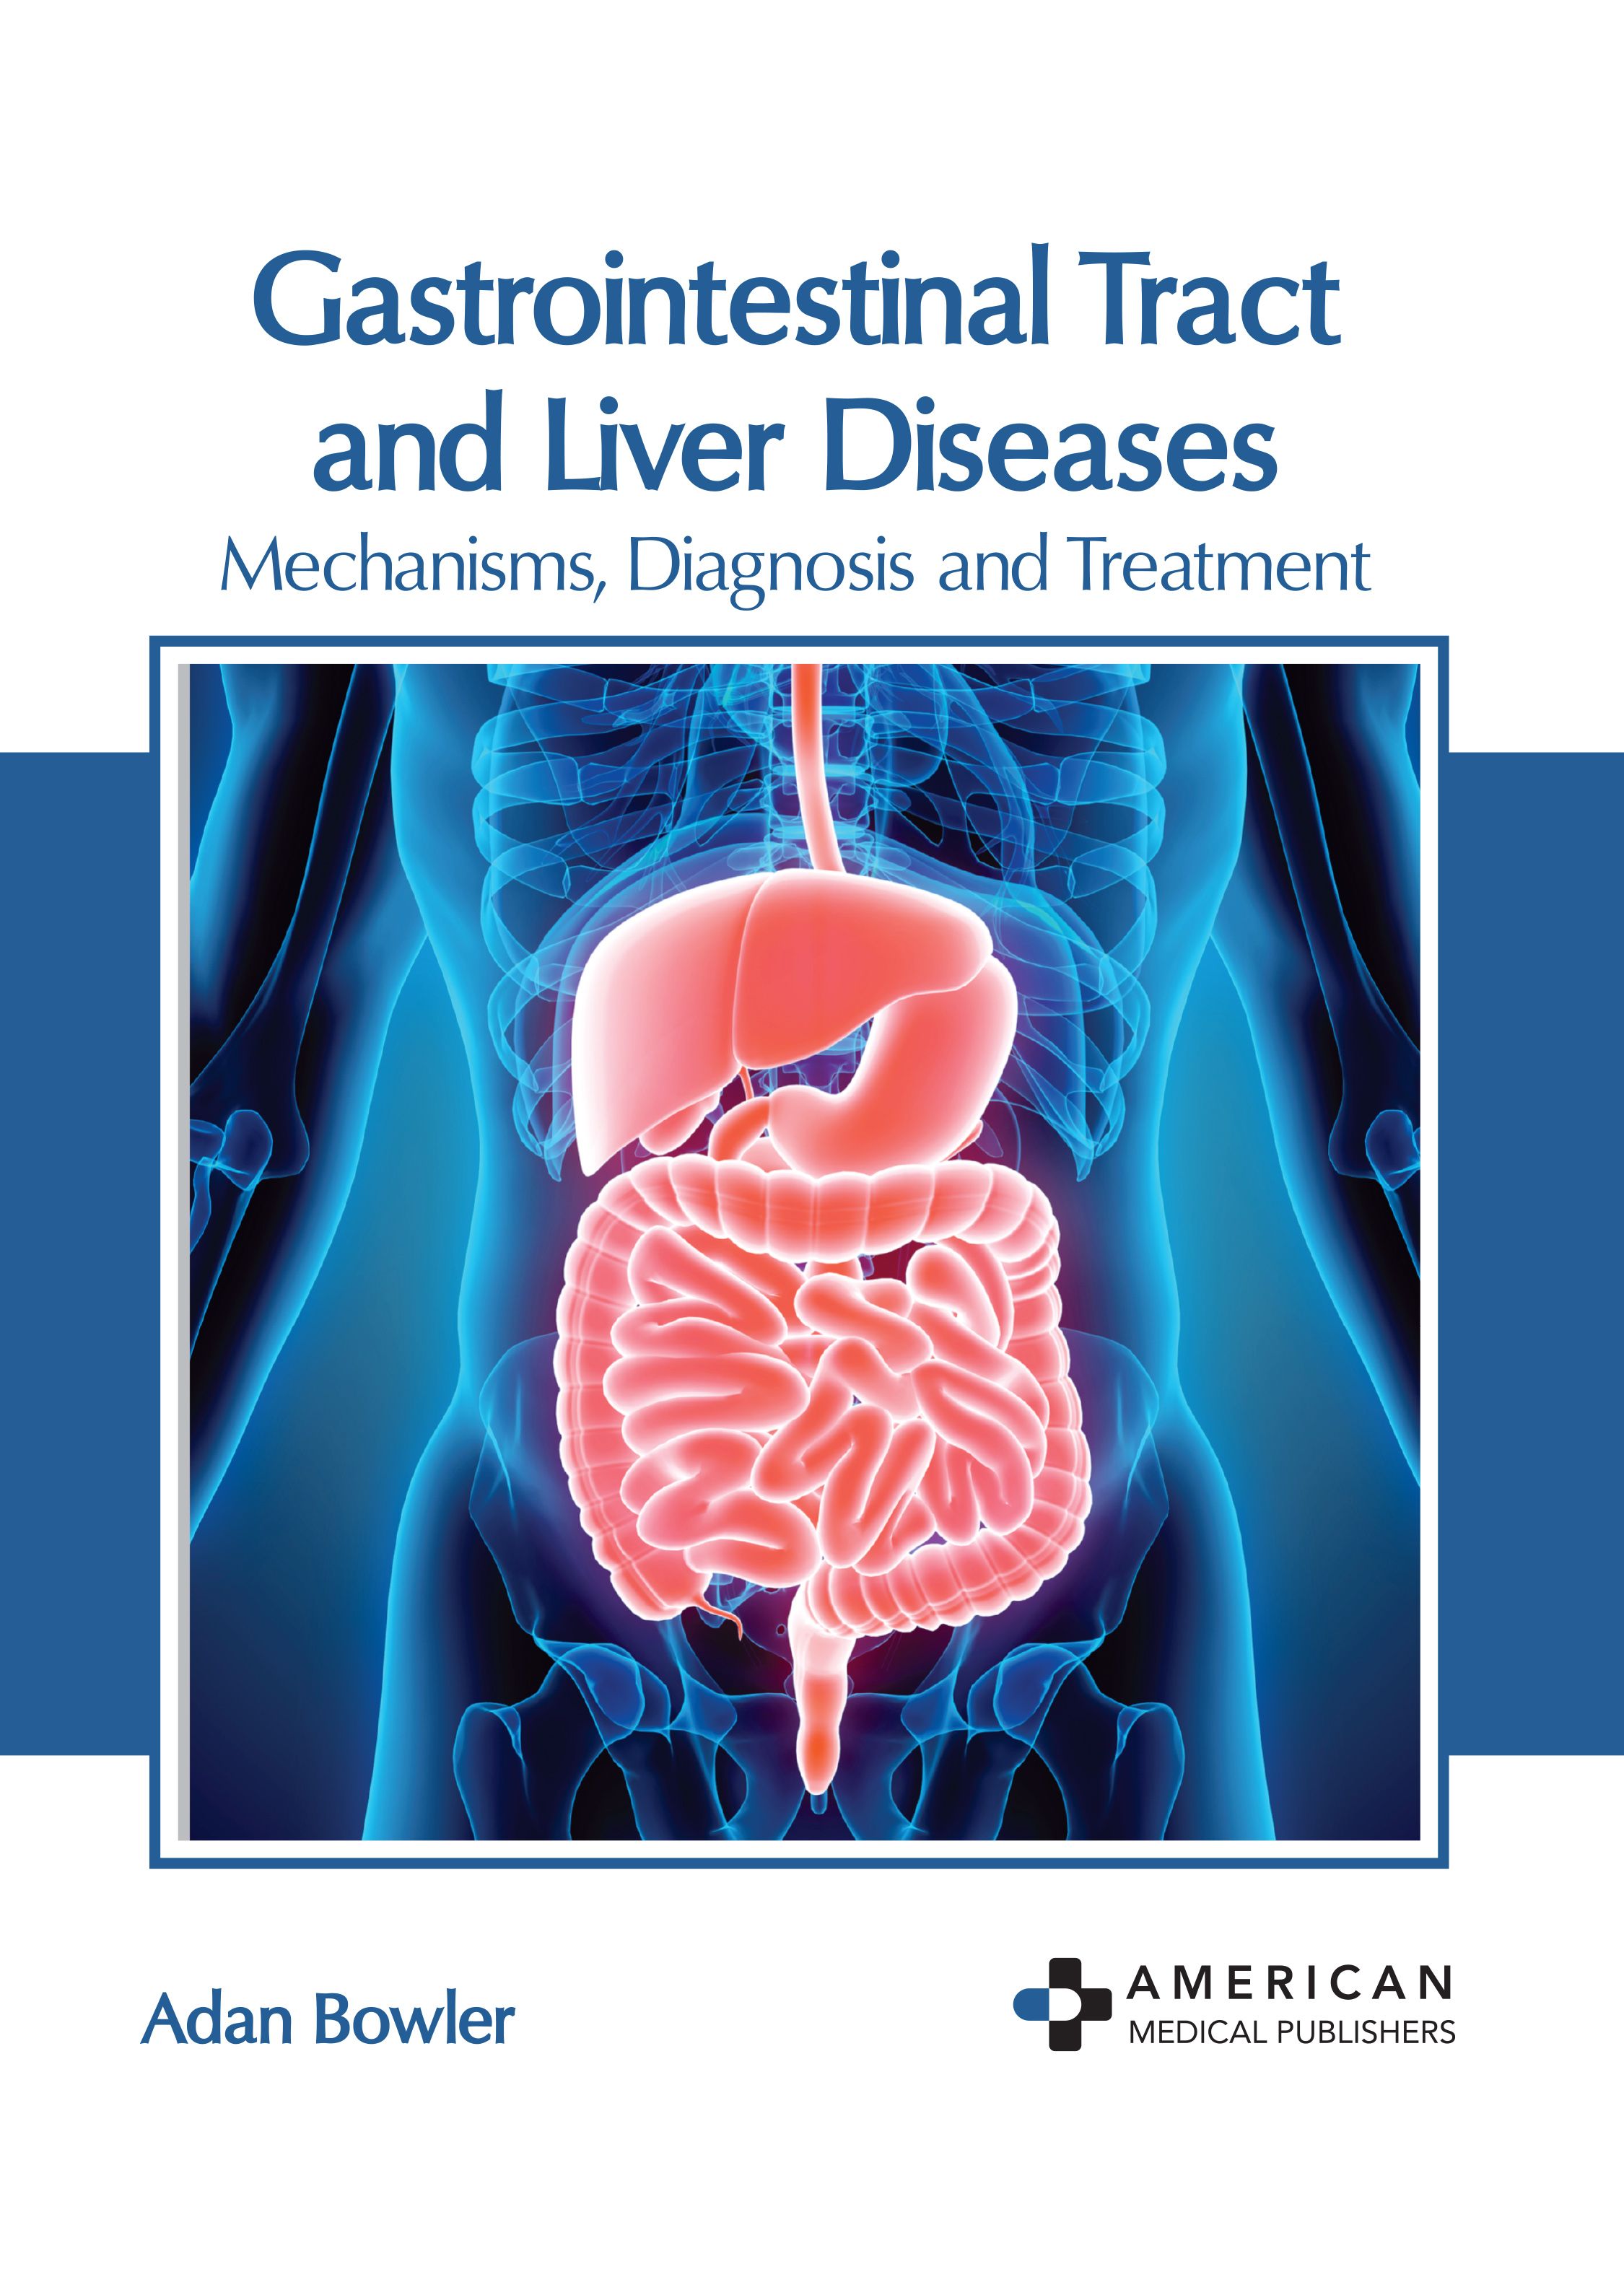 GASTROINTESTINAL TRACT AND LIVER DISEASES: MECHANISMS, DIAGNOSIS AND TREATMENT